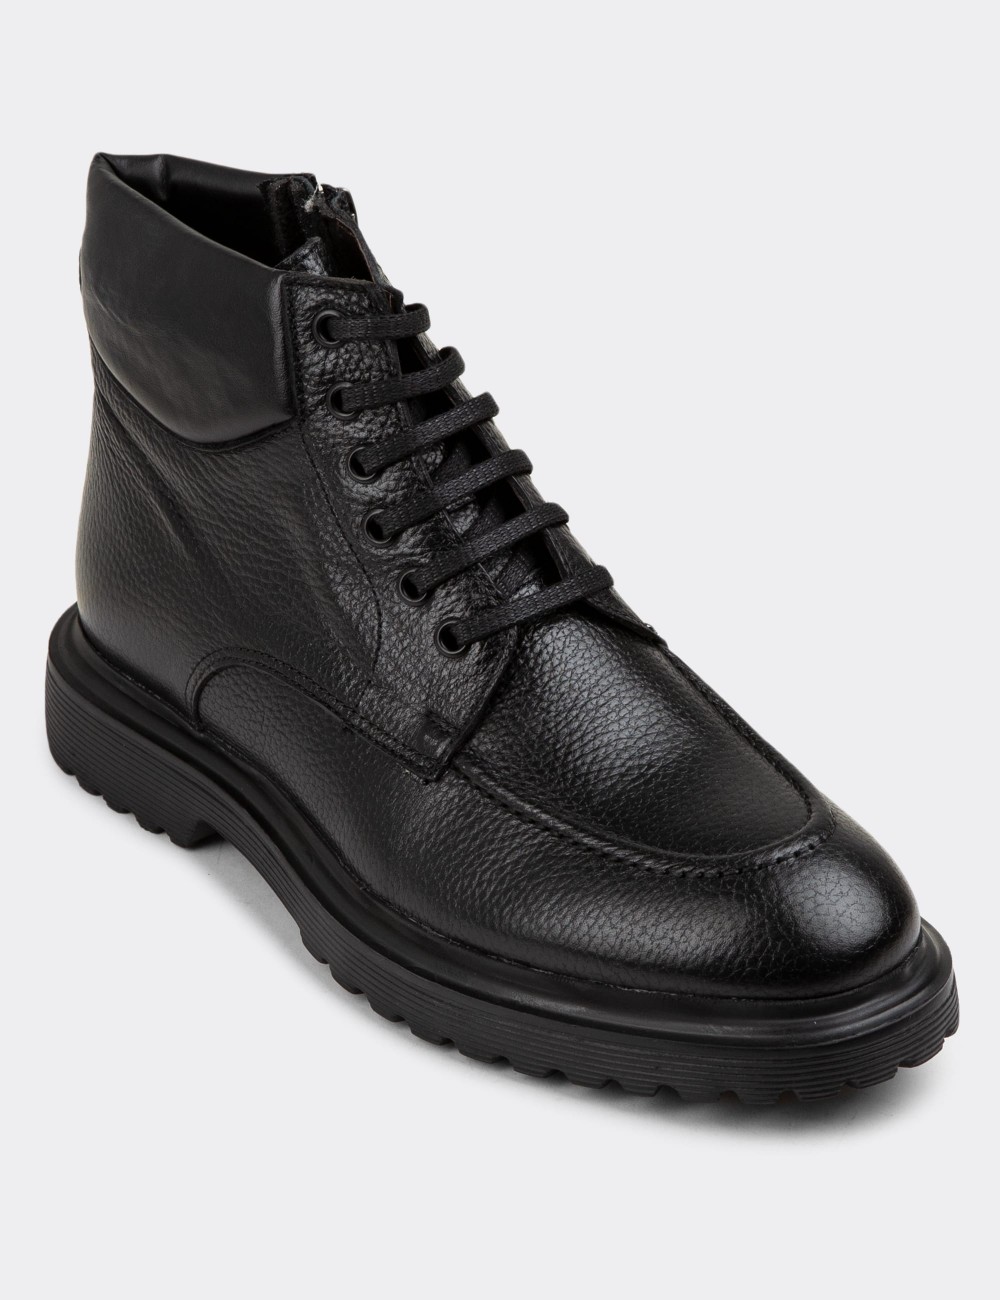 Black Leather Boots - 01929MSYHE01